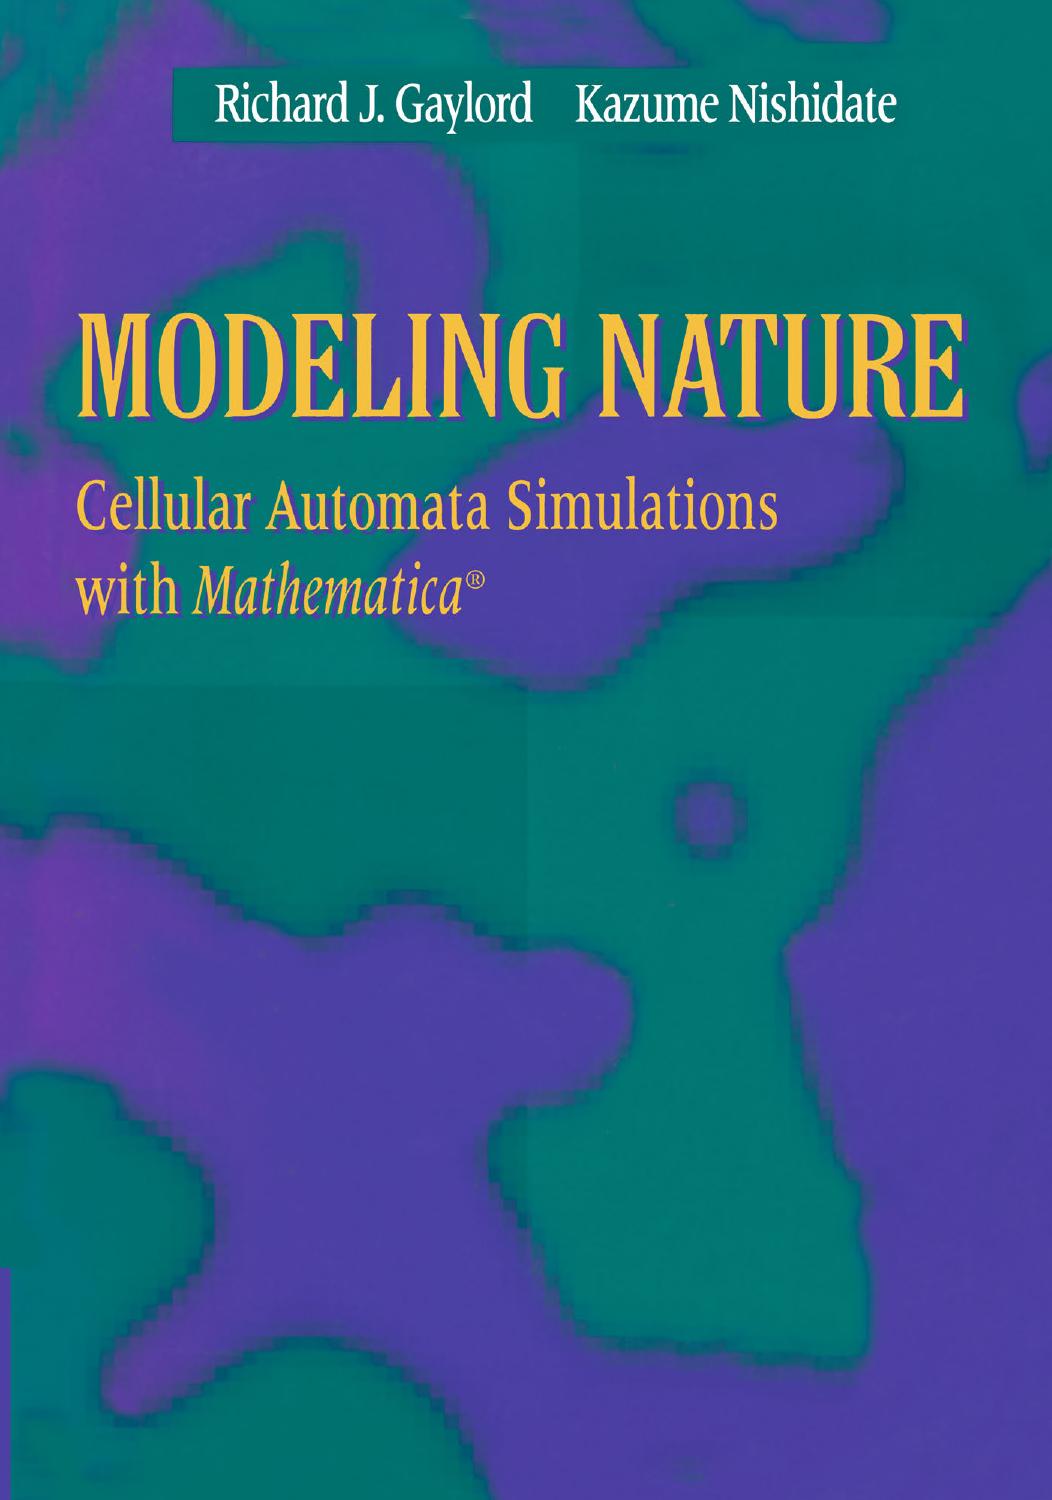 Modeling Nature: Cellular Automata Simulations with Mathematica®